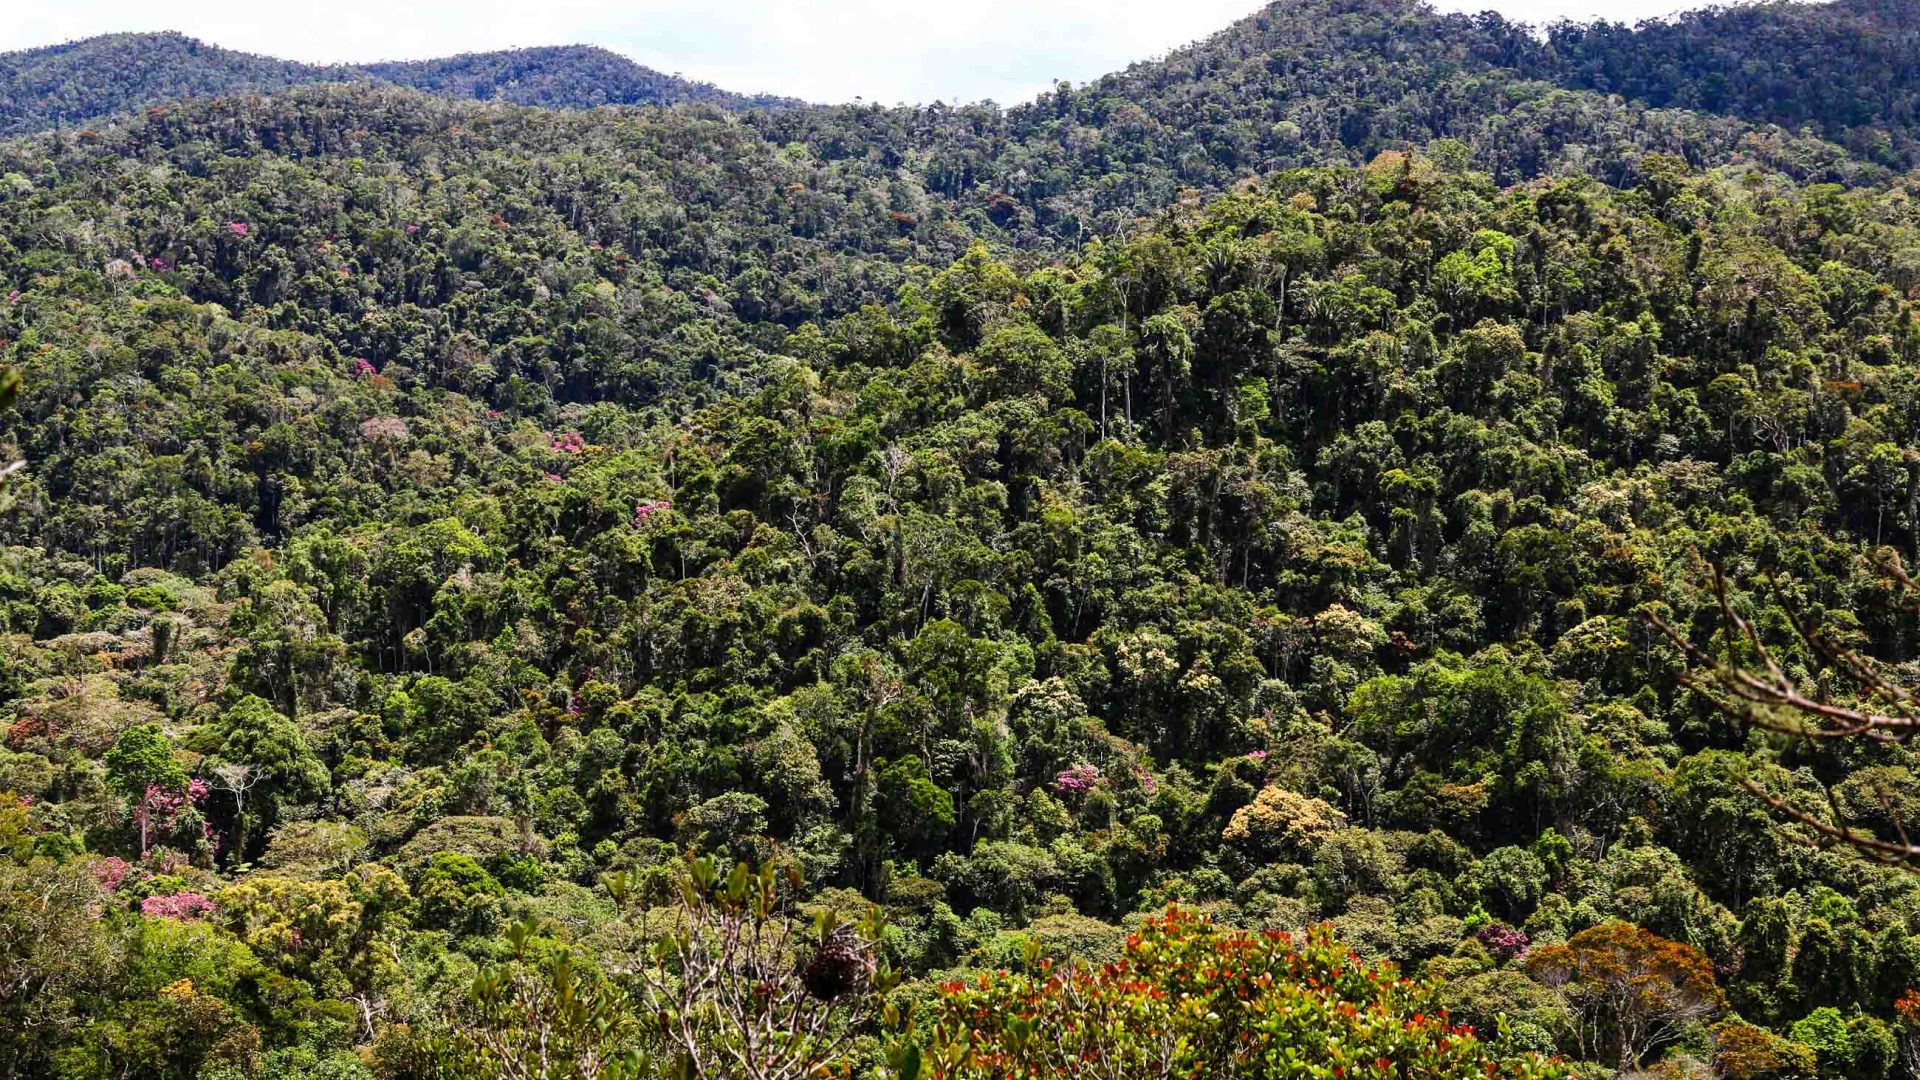 The primary rainforest of Mantadia National Park in eastern Madagascar.